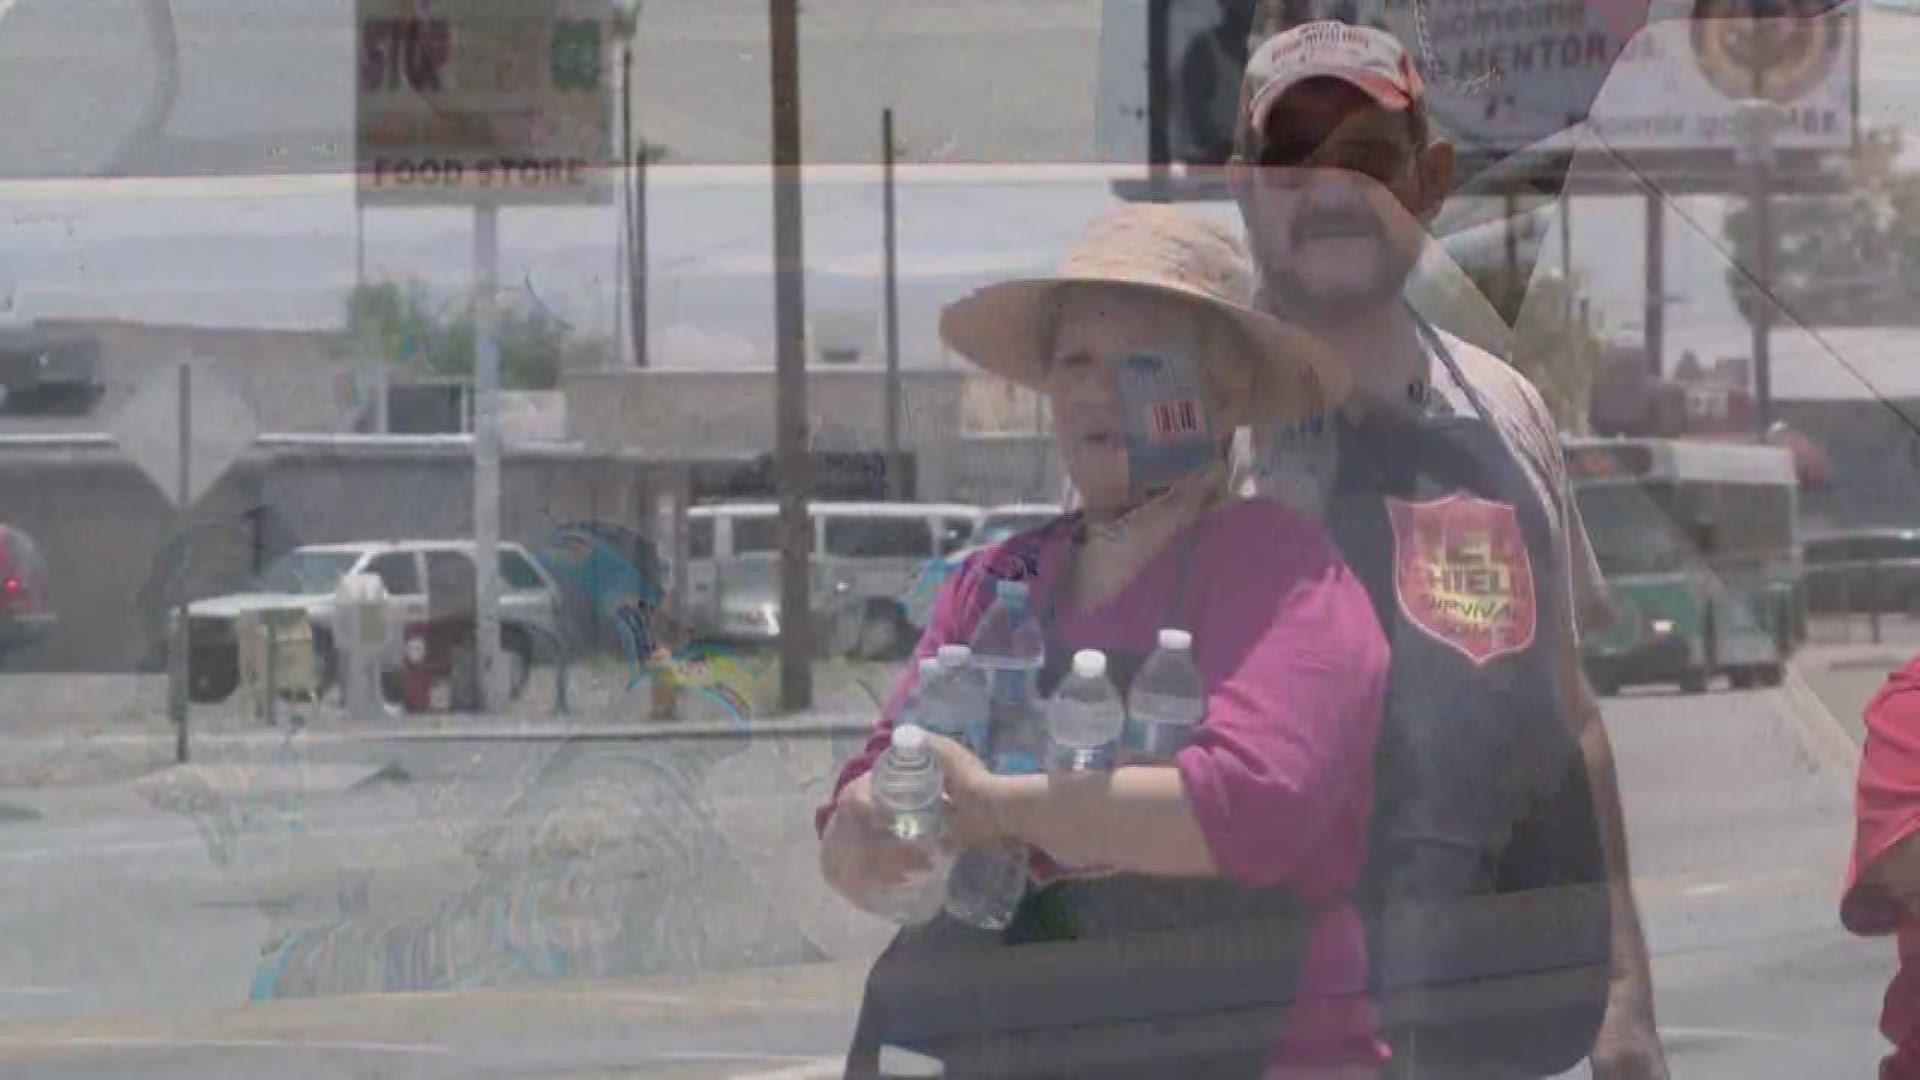 The Salvation Army has opened 14 heat relief station around the Valley.